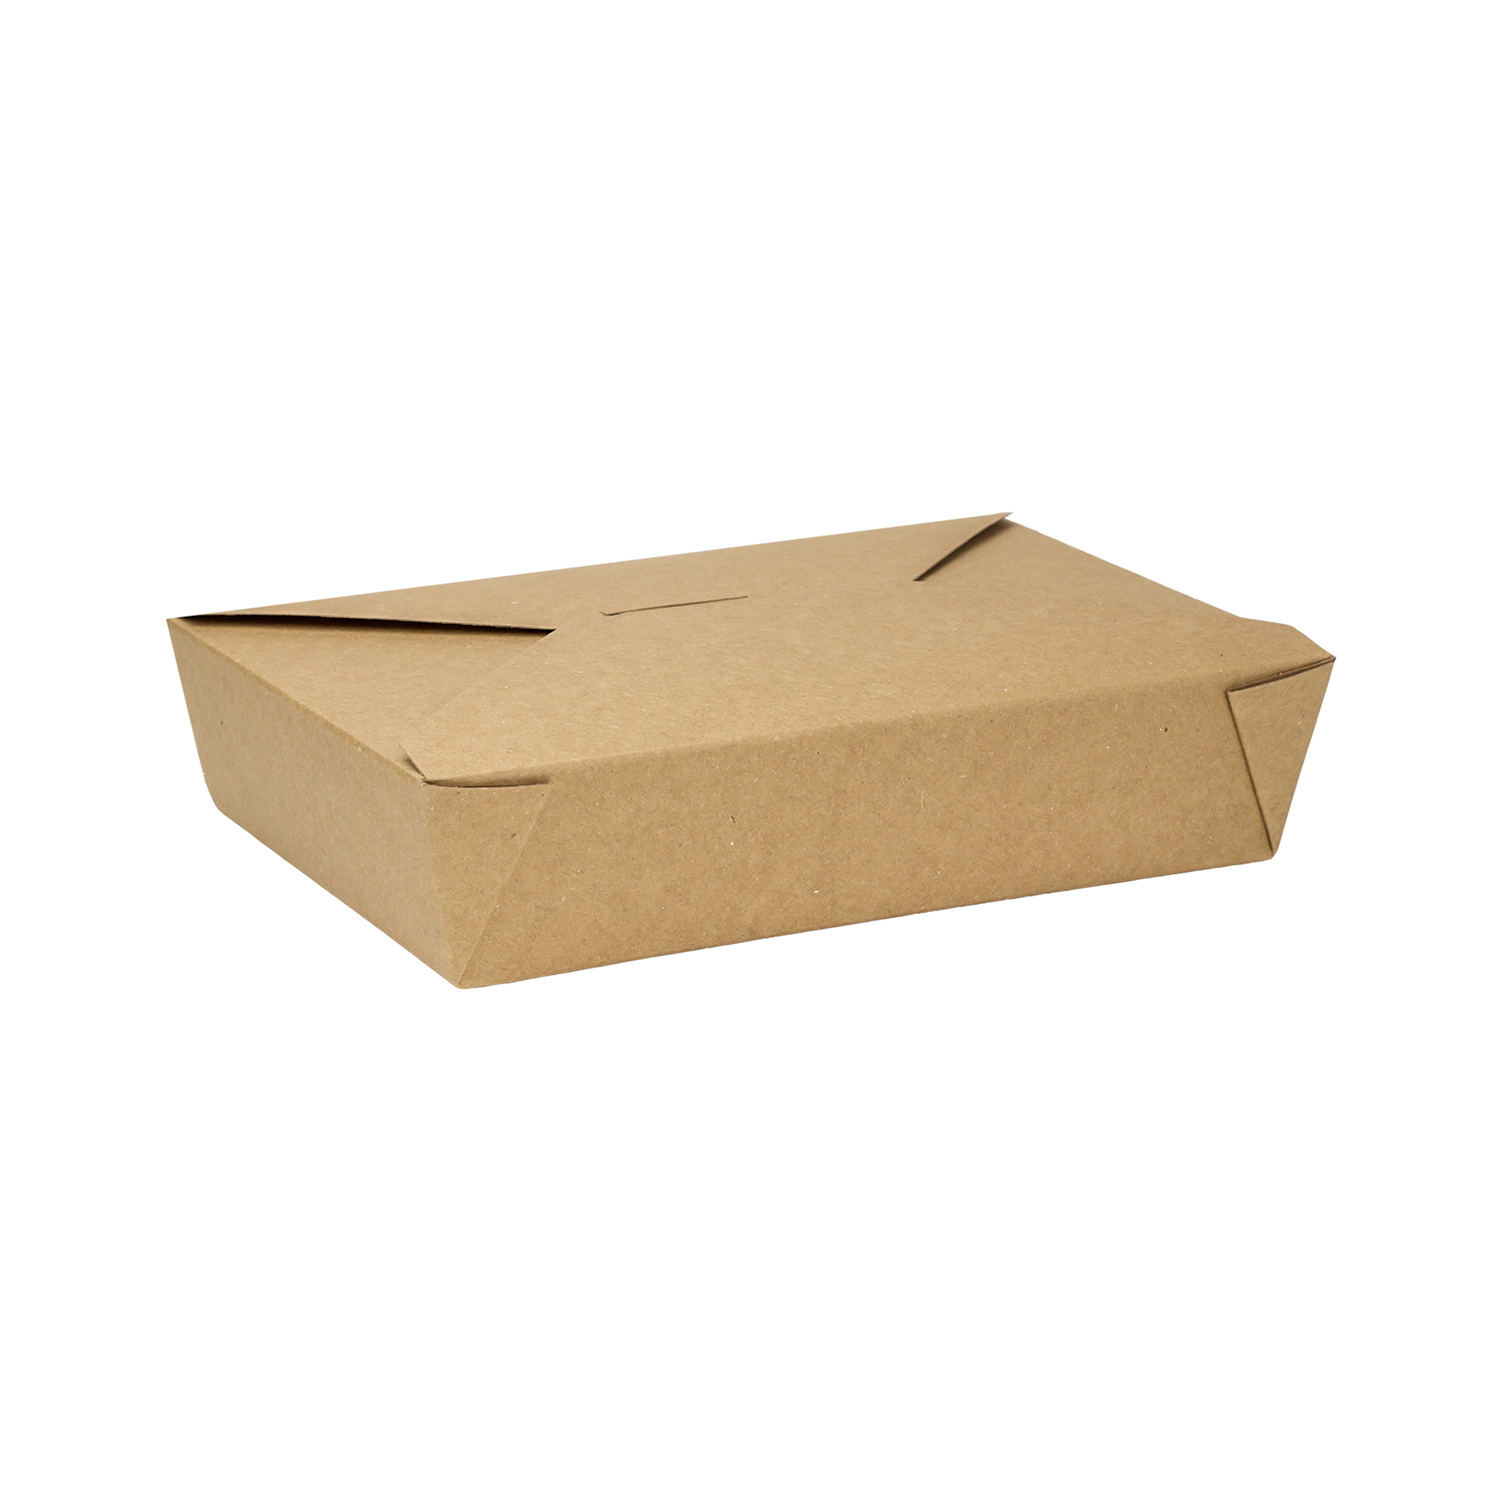 [50 Pack] 54 oz Paper Take Out Containers 8.5 x 6 x 2 - White Lunch Meal  Food Boxes #2, Disposable Storage To Go Packaging, Microwave Safe, Leak